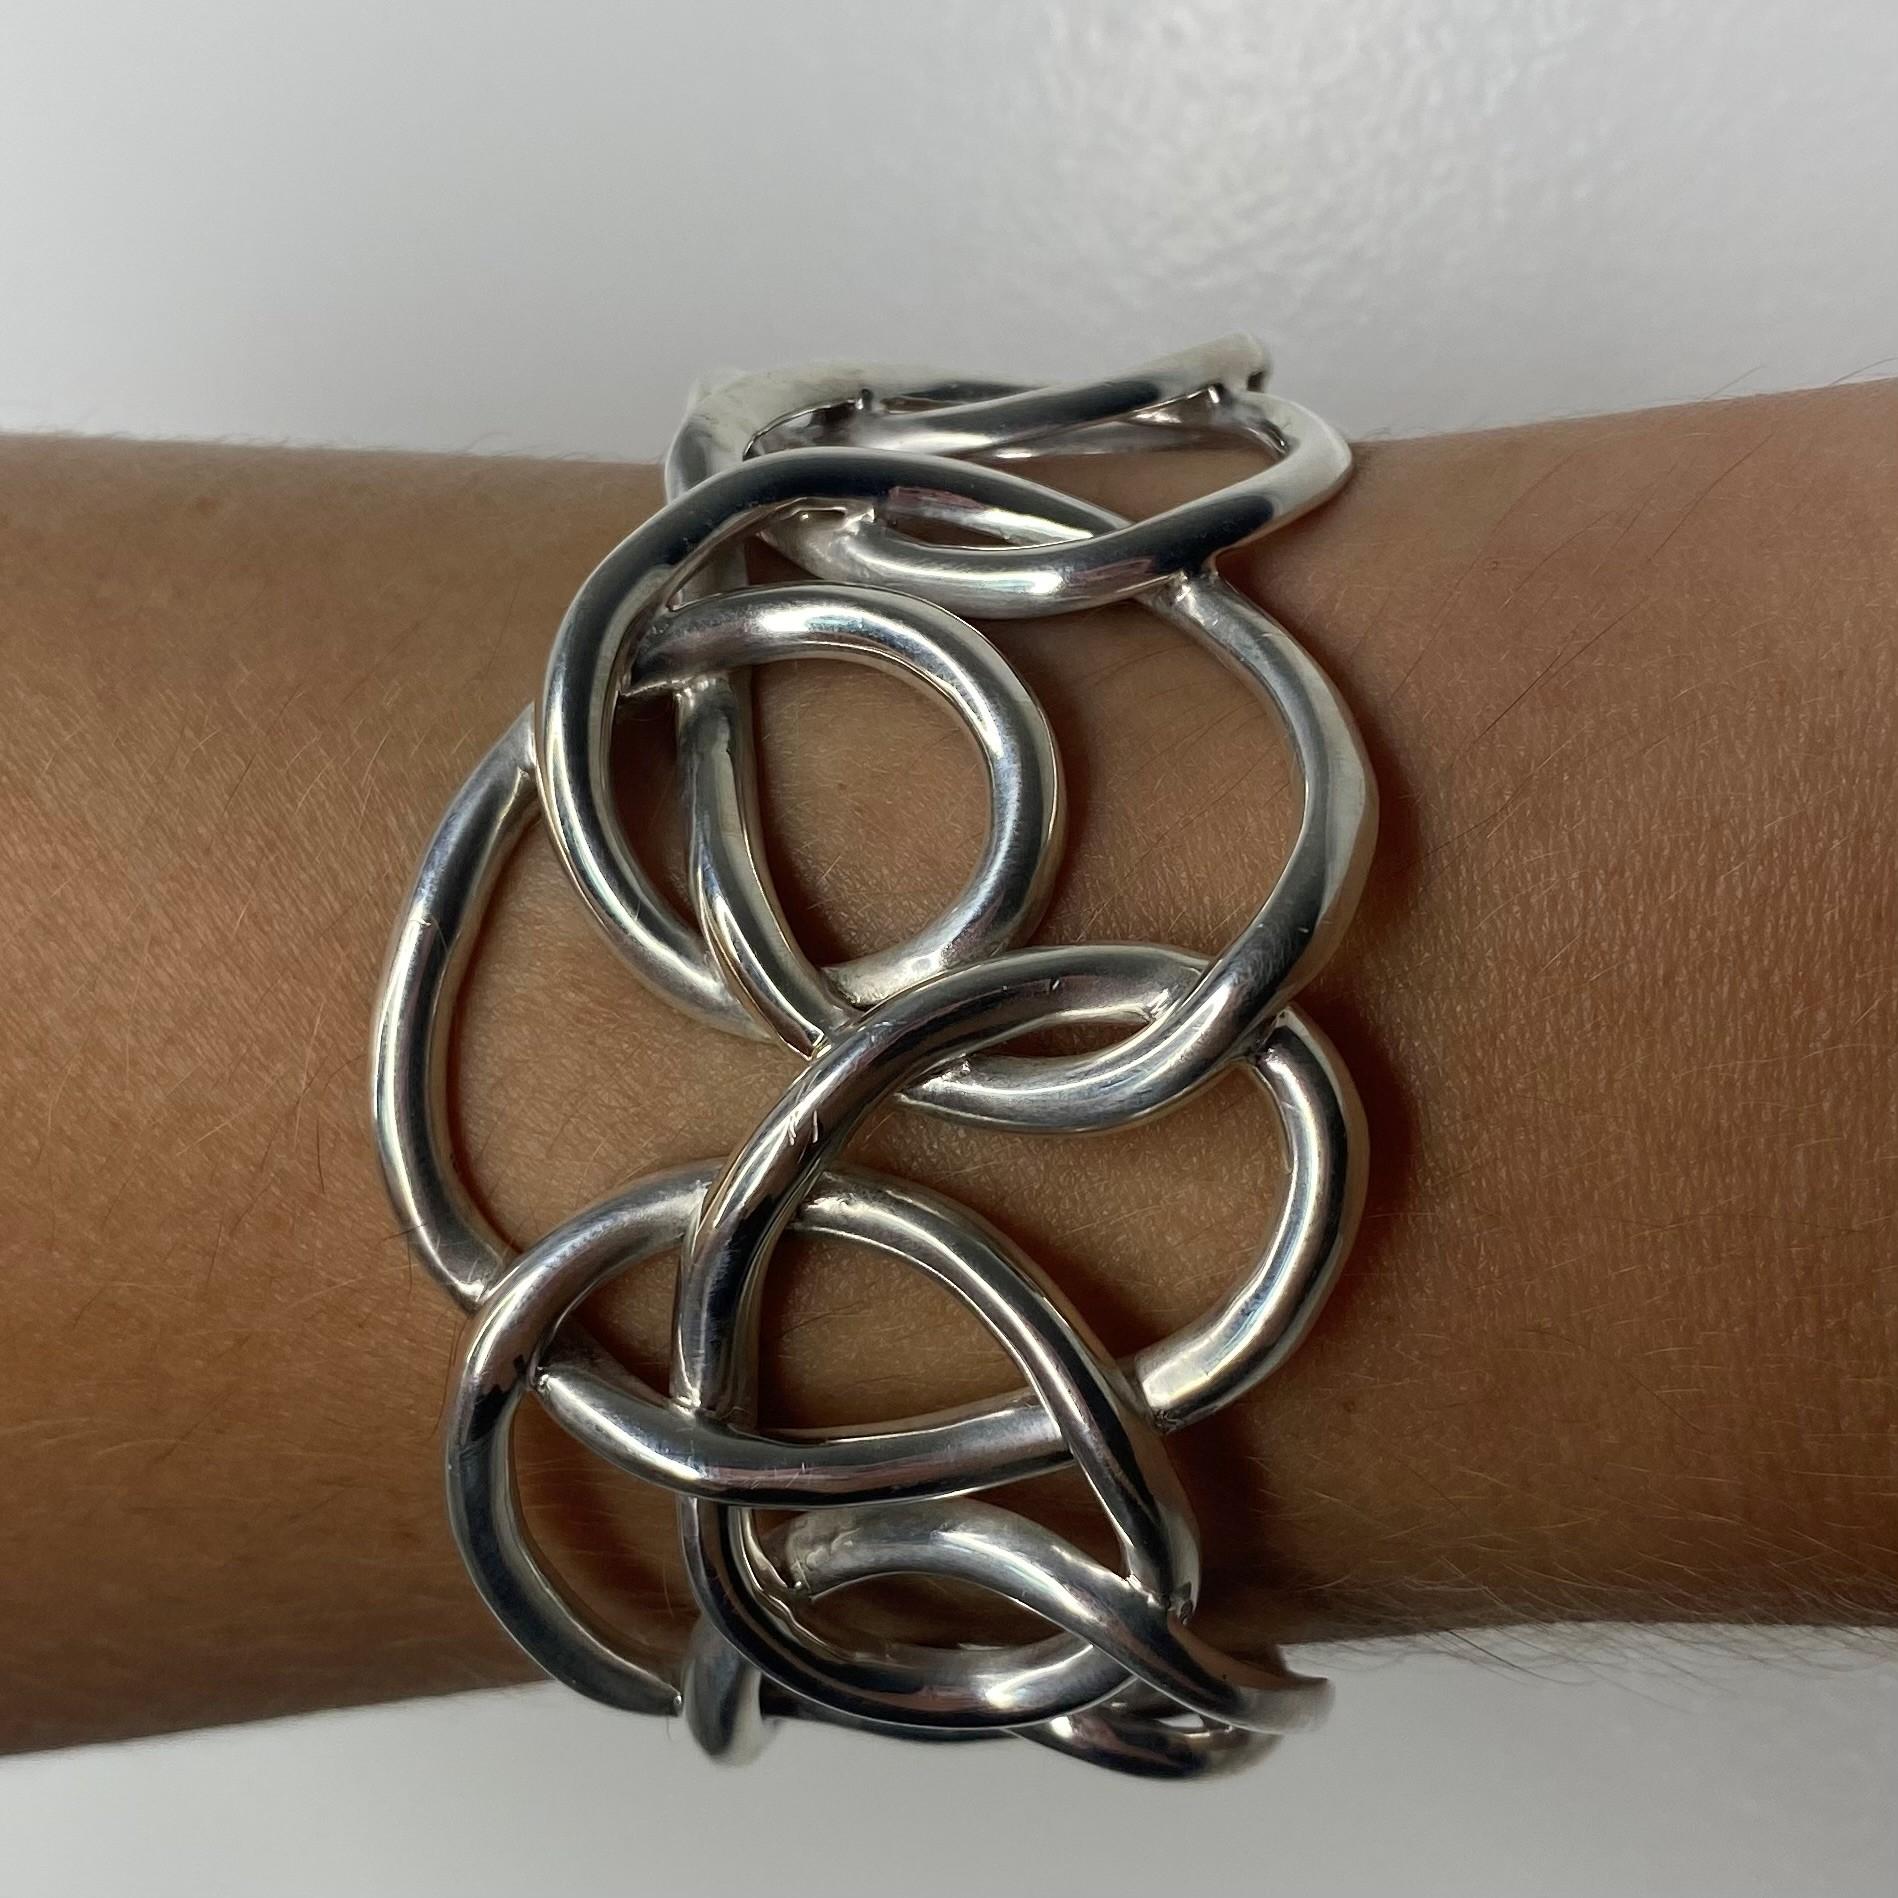 A free forms cuff bracelet designed by Angela Cummings.

Beautiful sculptural piece created by Angela Cummings at her goldsmith's studio in New York city, back in the 1991. This modernist cuff bracelet has been crafted with free-forms patterns in